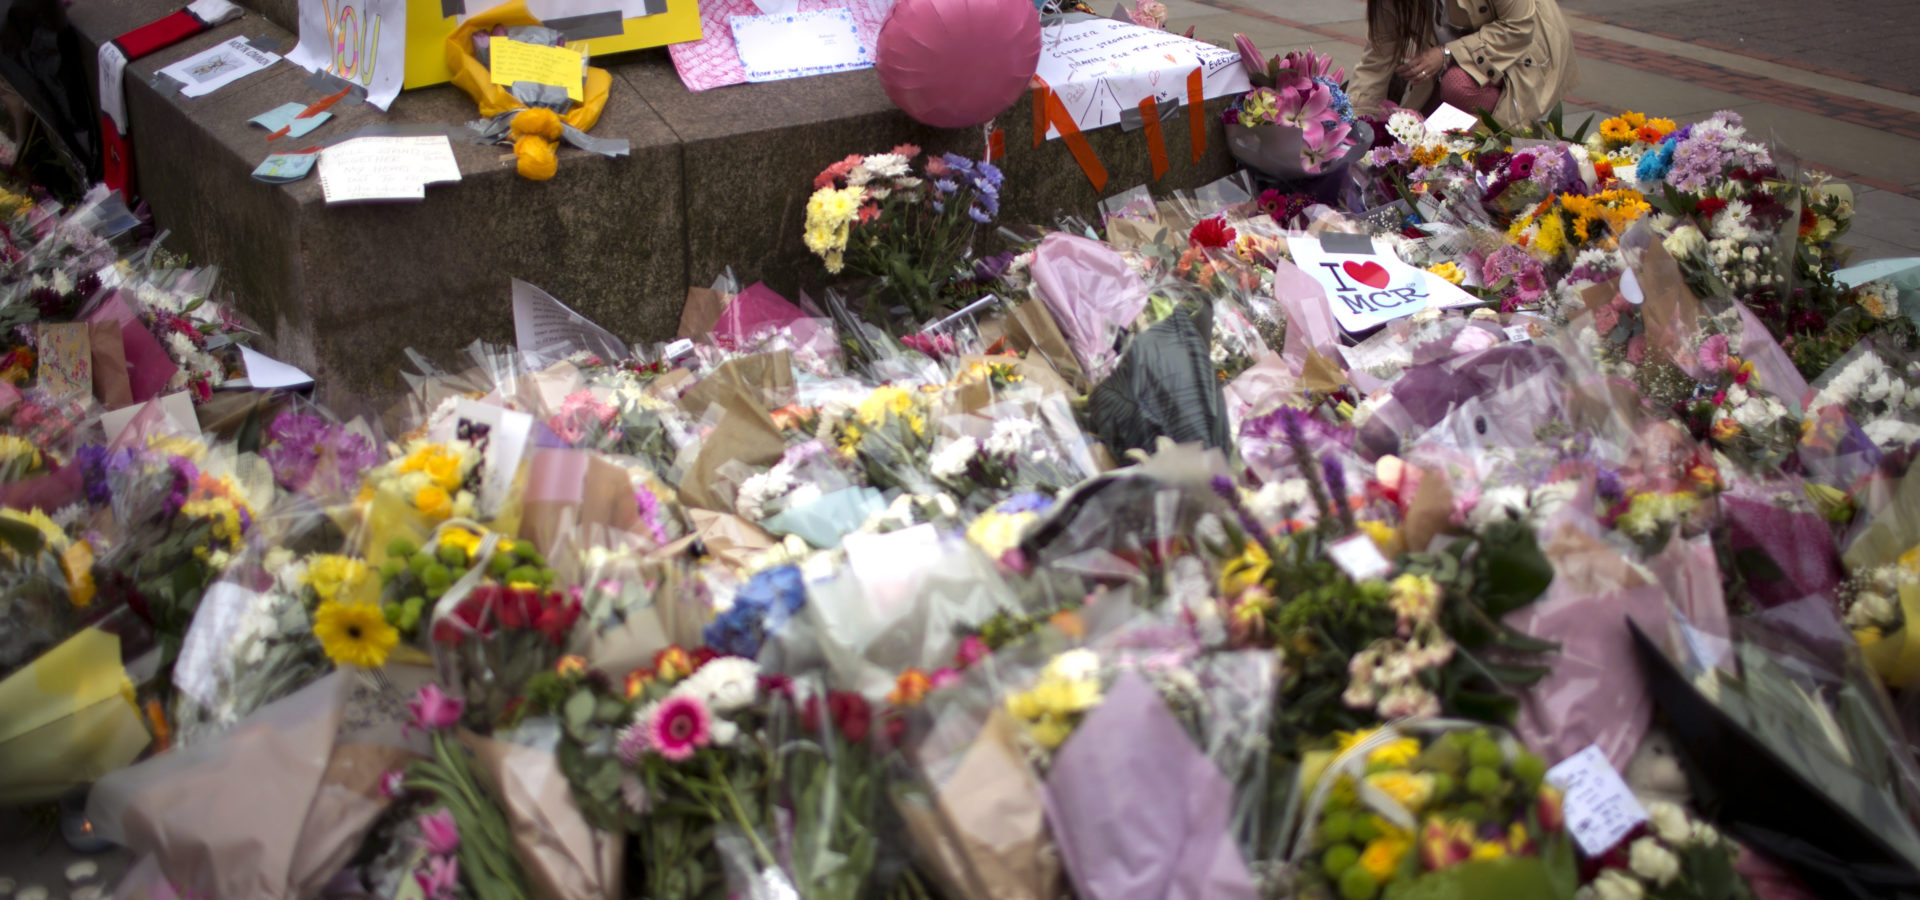 A woman places flowers at a memorial for the victims of a suicide attack at a concert by Ariana Grande that killed more than 20 people Monday night in central Manchester, Britain, Wednesday, May 24, 2017. (AP/Emilio Morenatti)